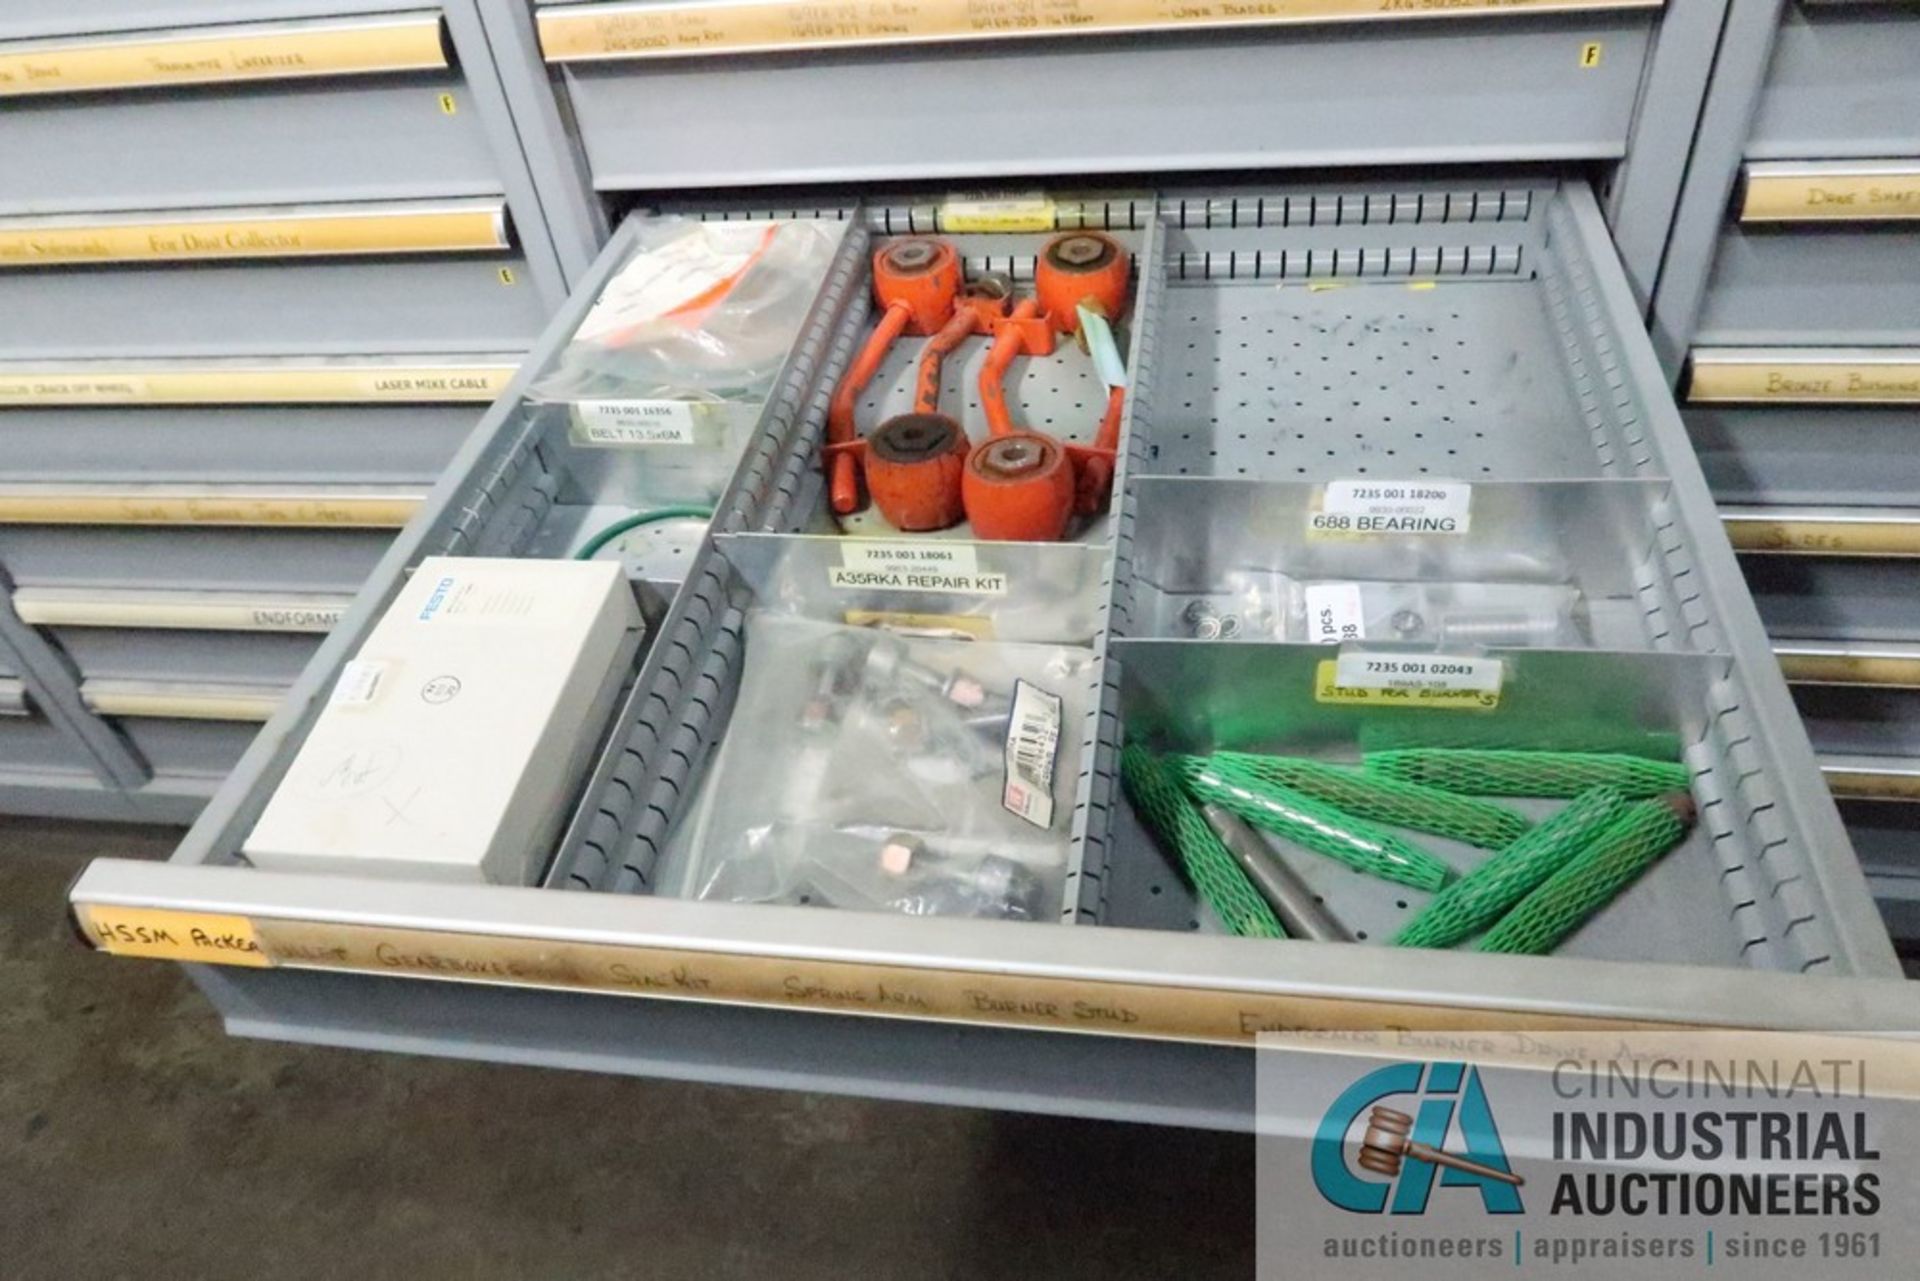 11-DRAWER LISTA CABINET WITH CONTENTS INCLUDING MISCELLANEOUS FURNACE BURNER PARTS, BELTS, BEARINGS, - Image 7 of 11